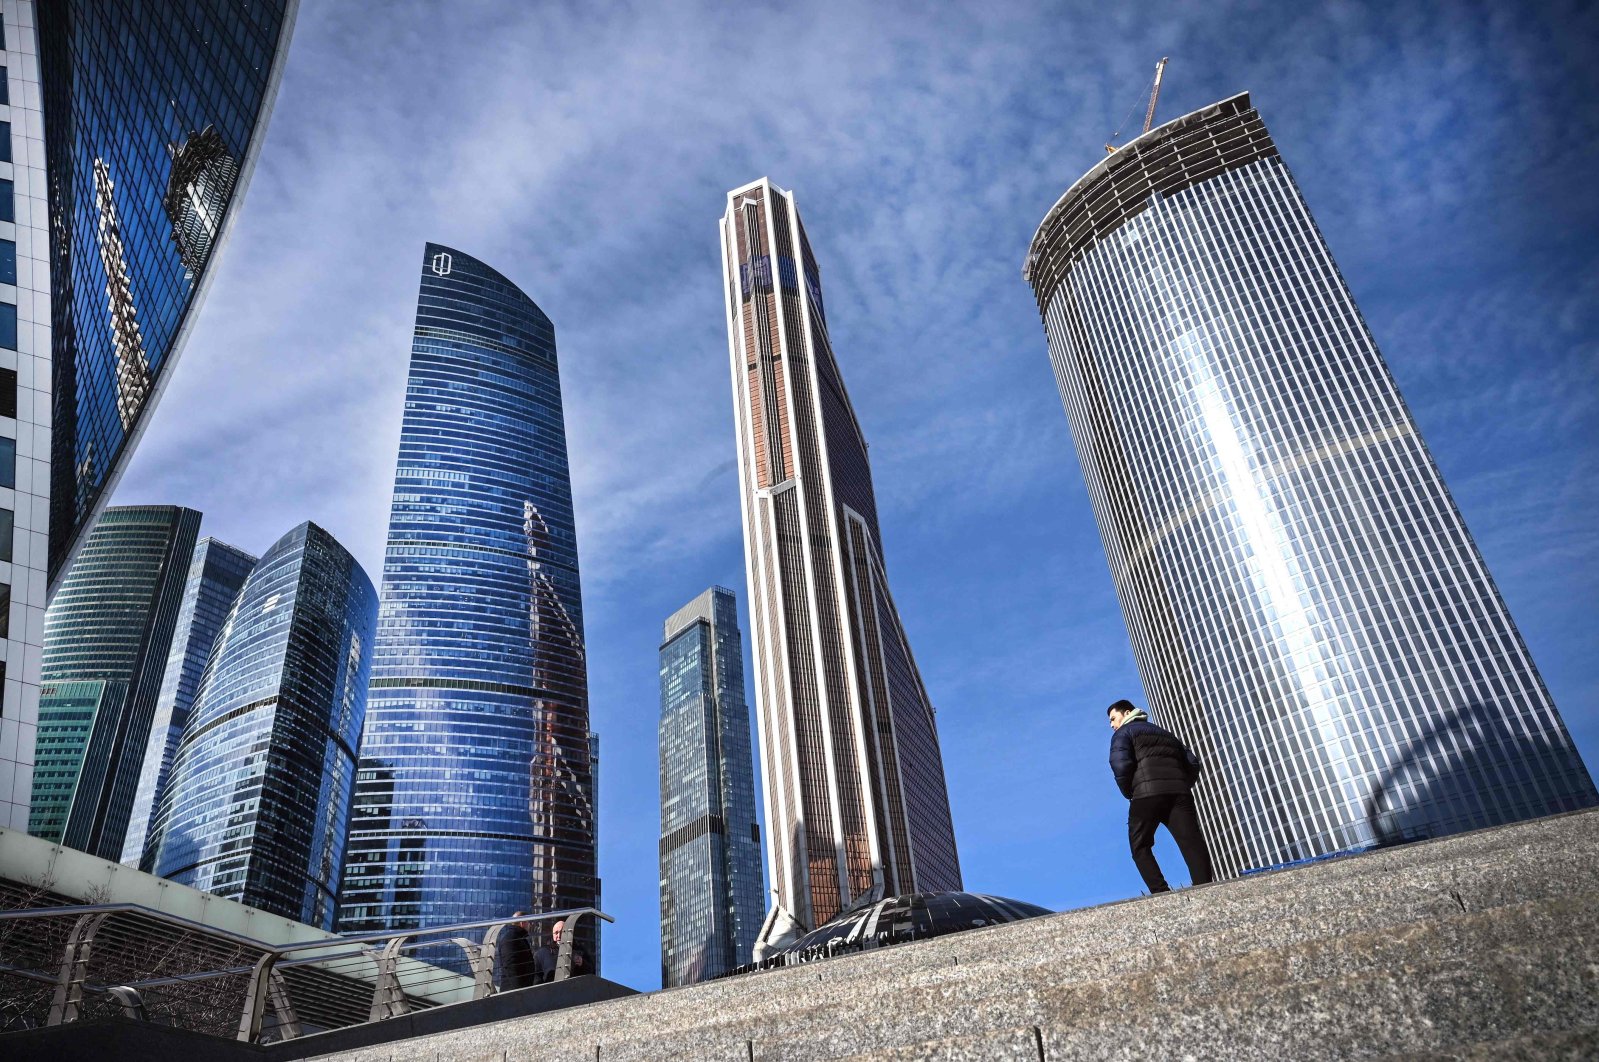 A man walks in front of the Moscow International Business Center (Moskva City) in Moscow, Russia, March 11, 2022. (AFP Photo)